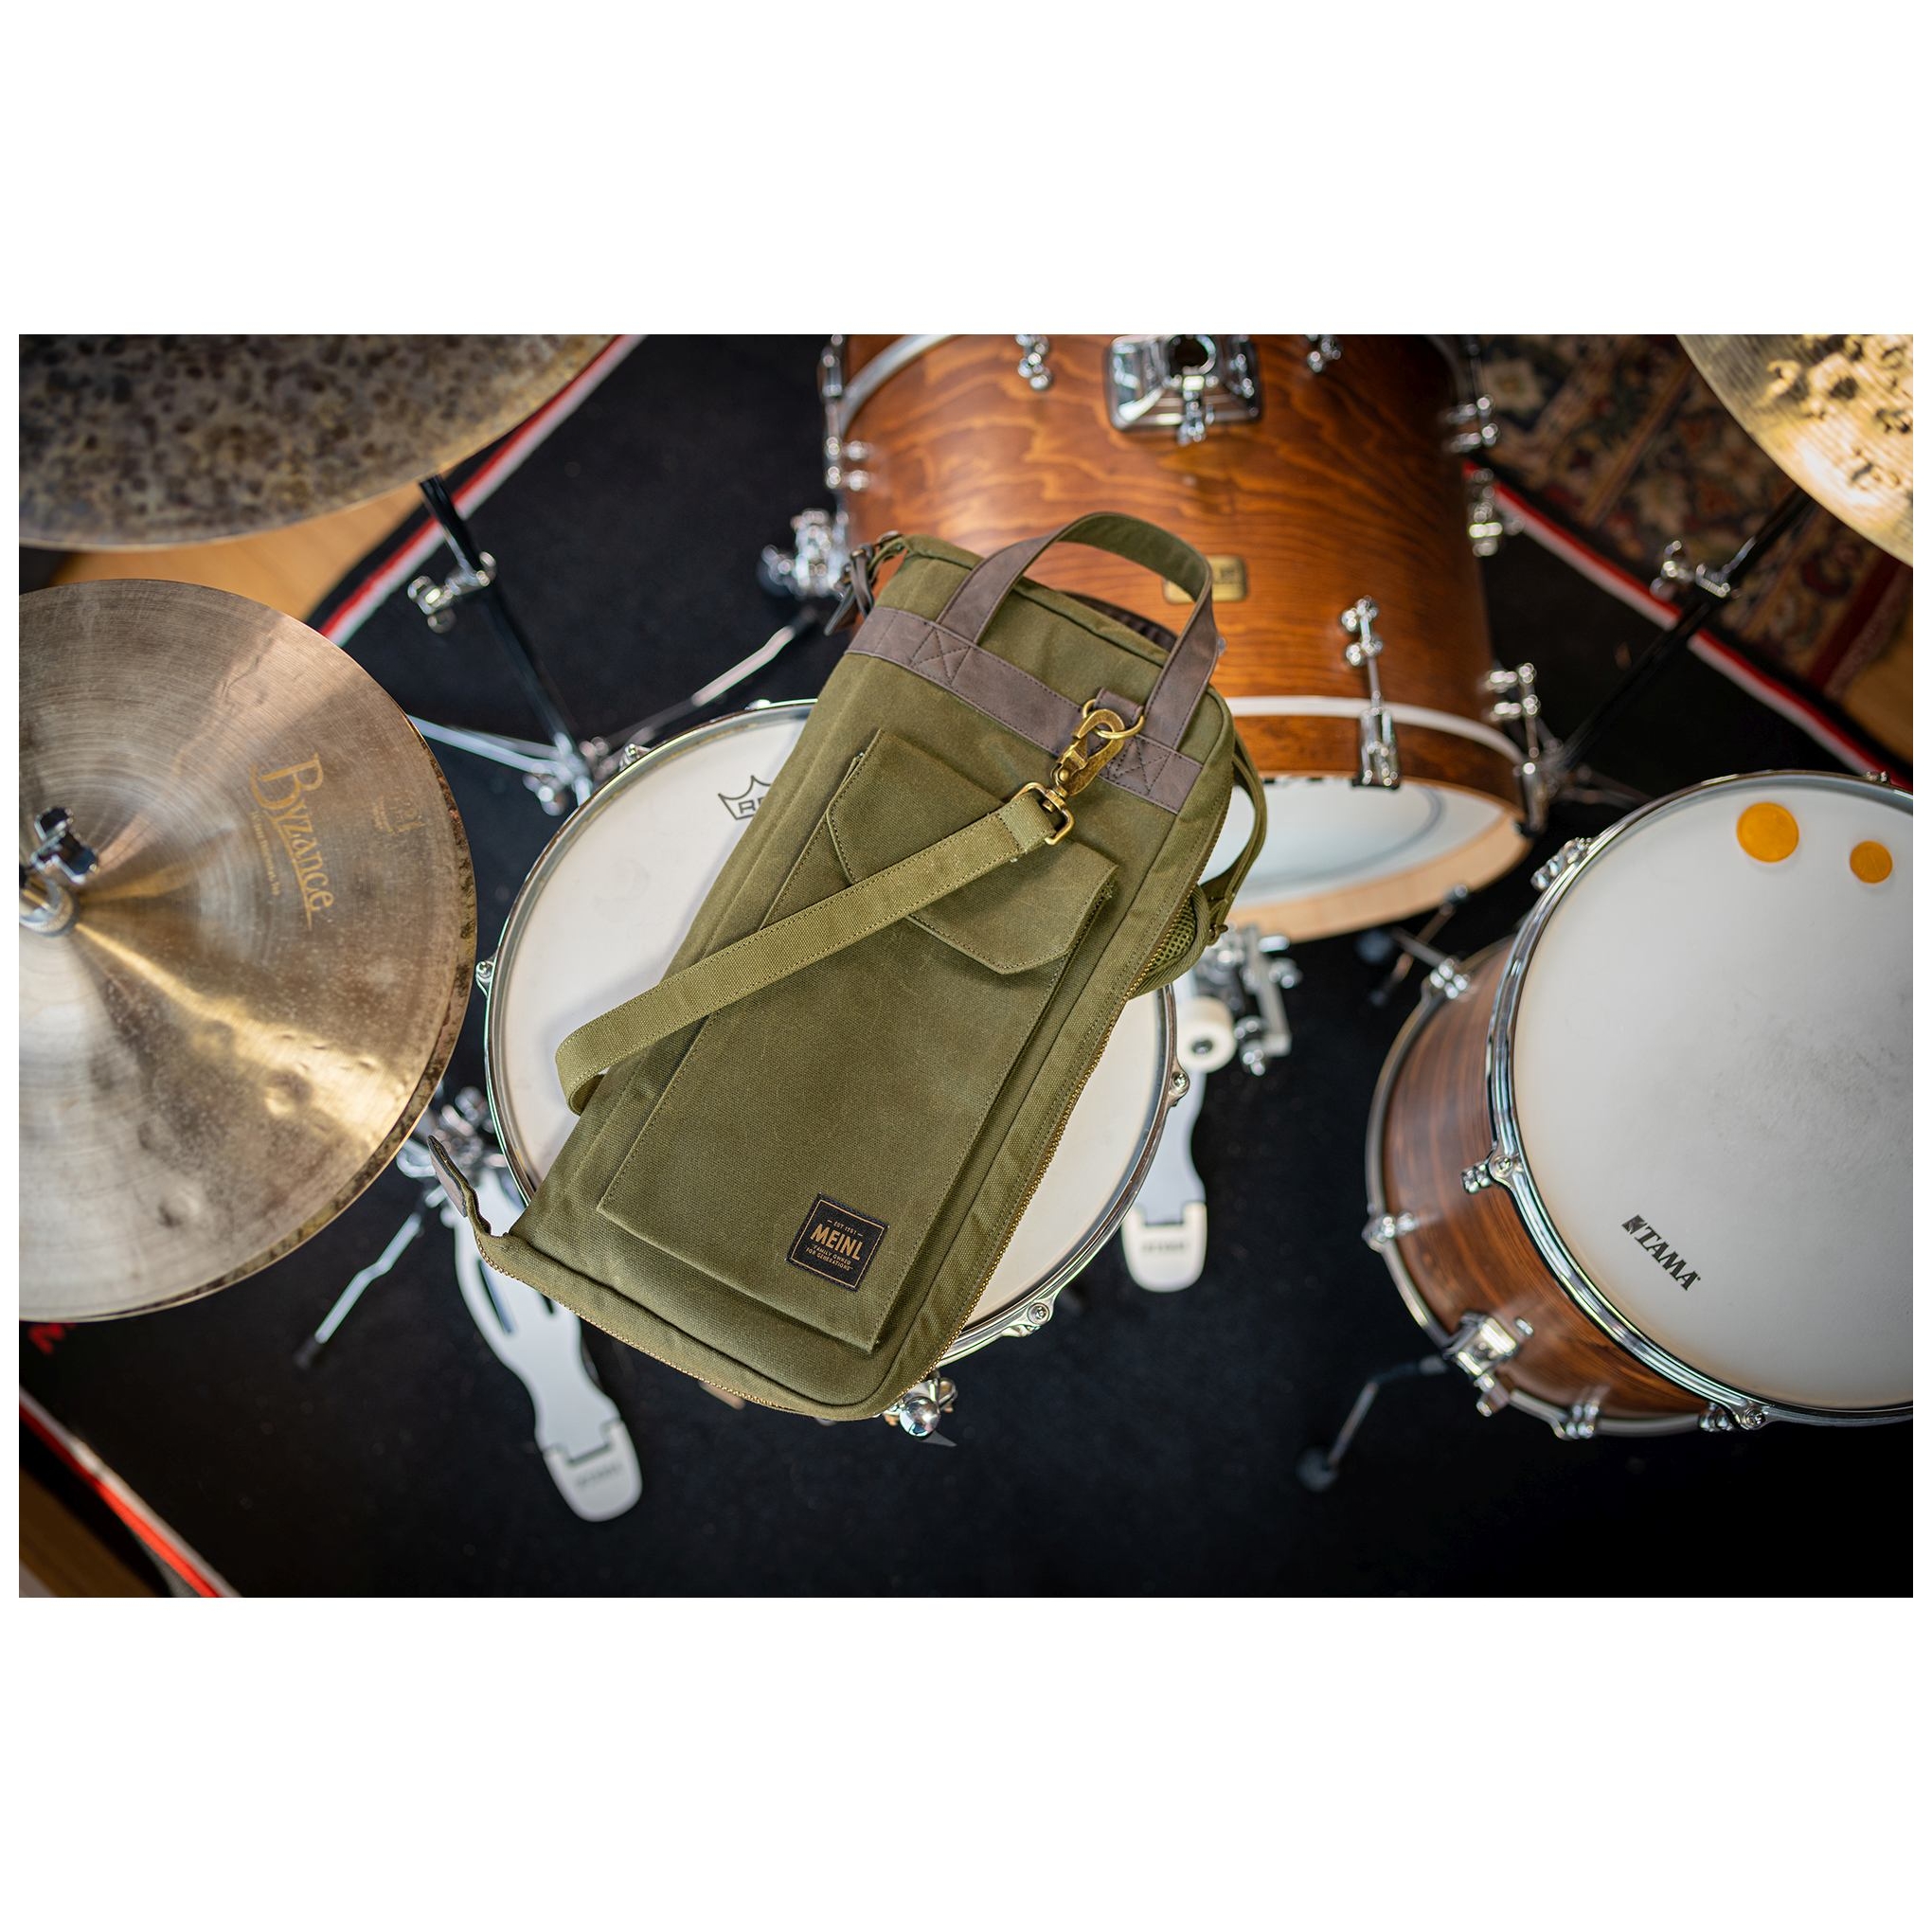 Meinl Cymbals MWSGR Canvas Collection Stick Bag, Forrest Green